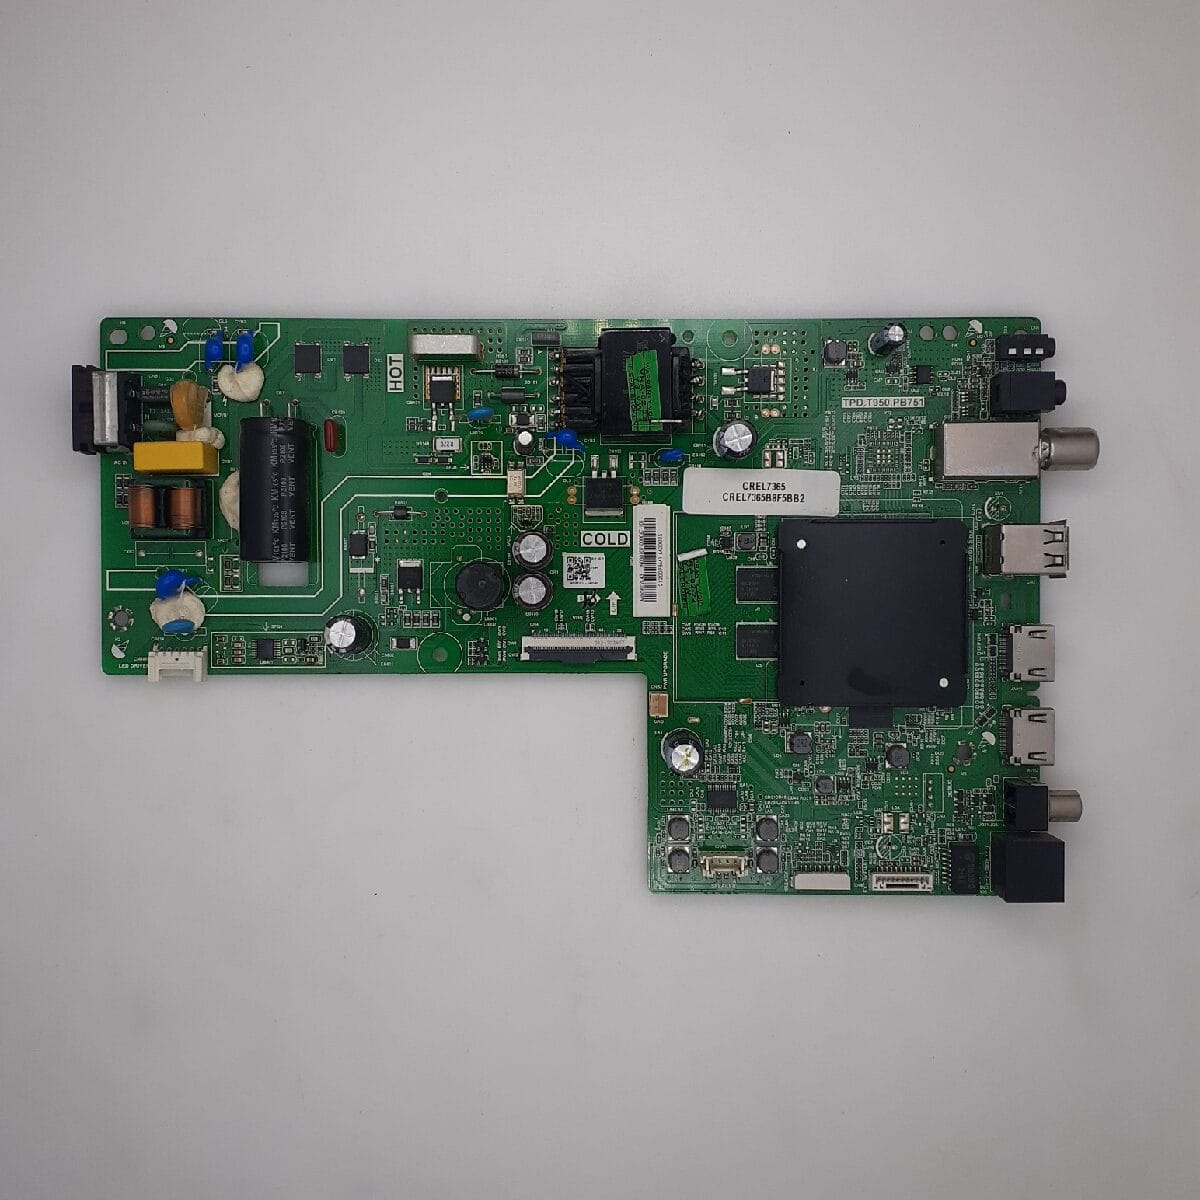 CREL7365 CROMA MOTHERBOARD FOR LED TV